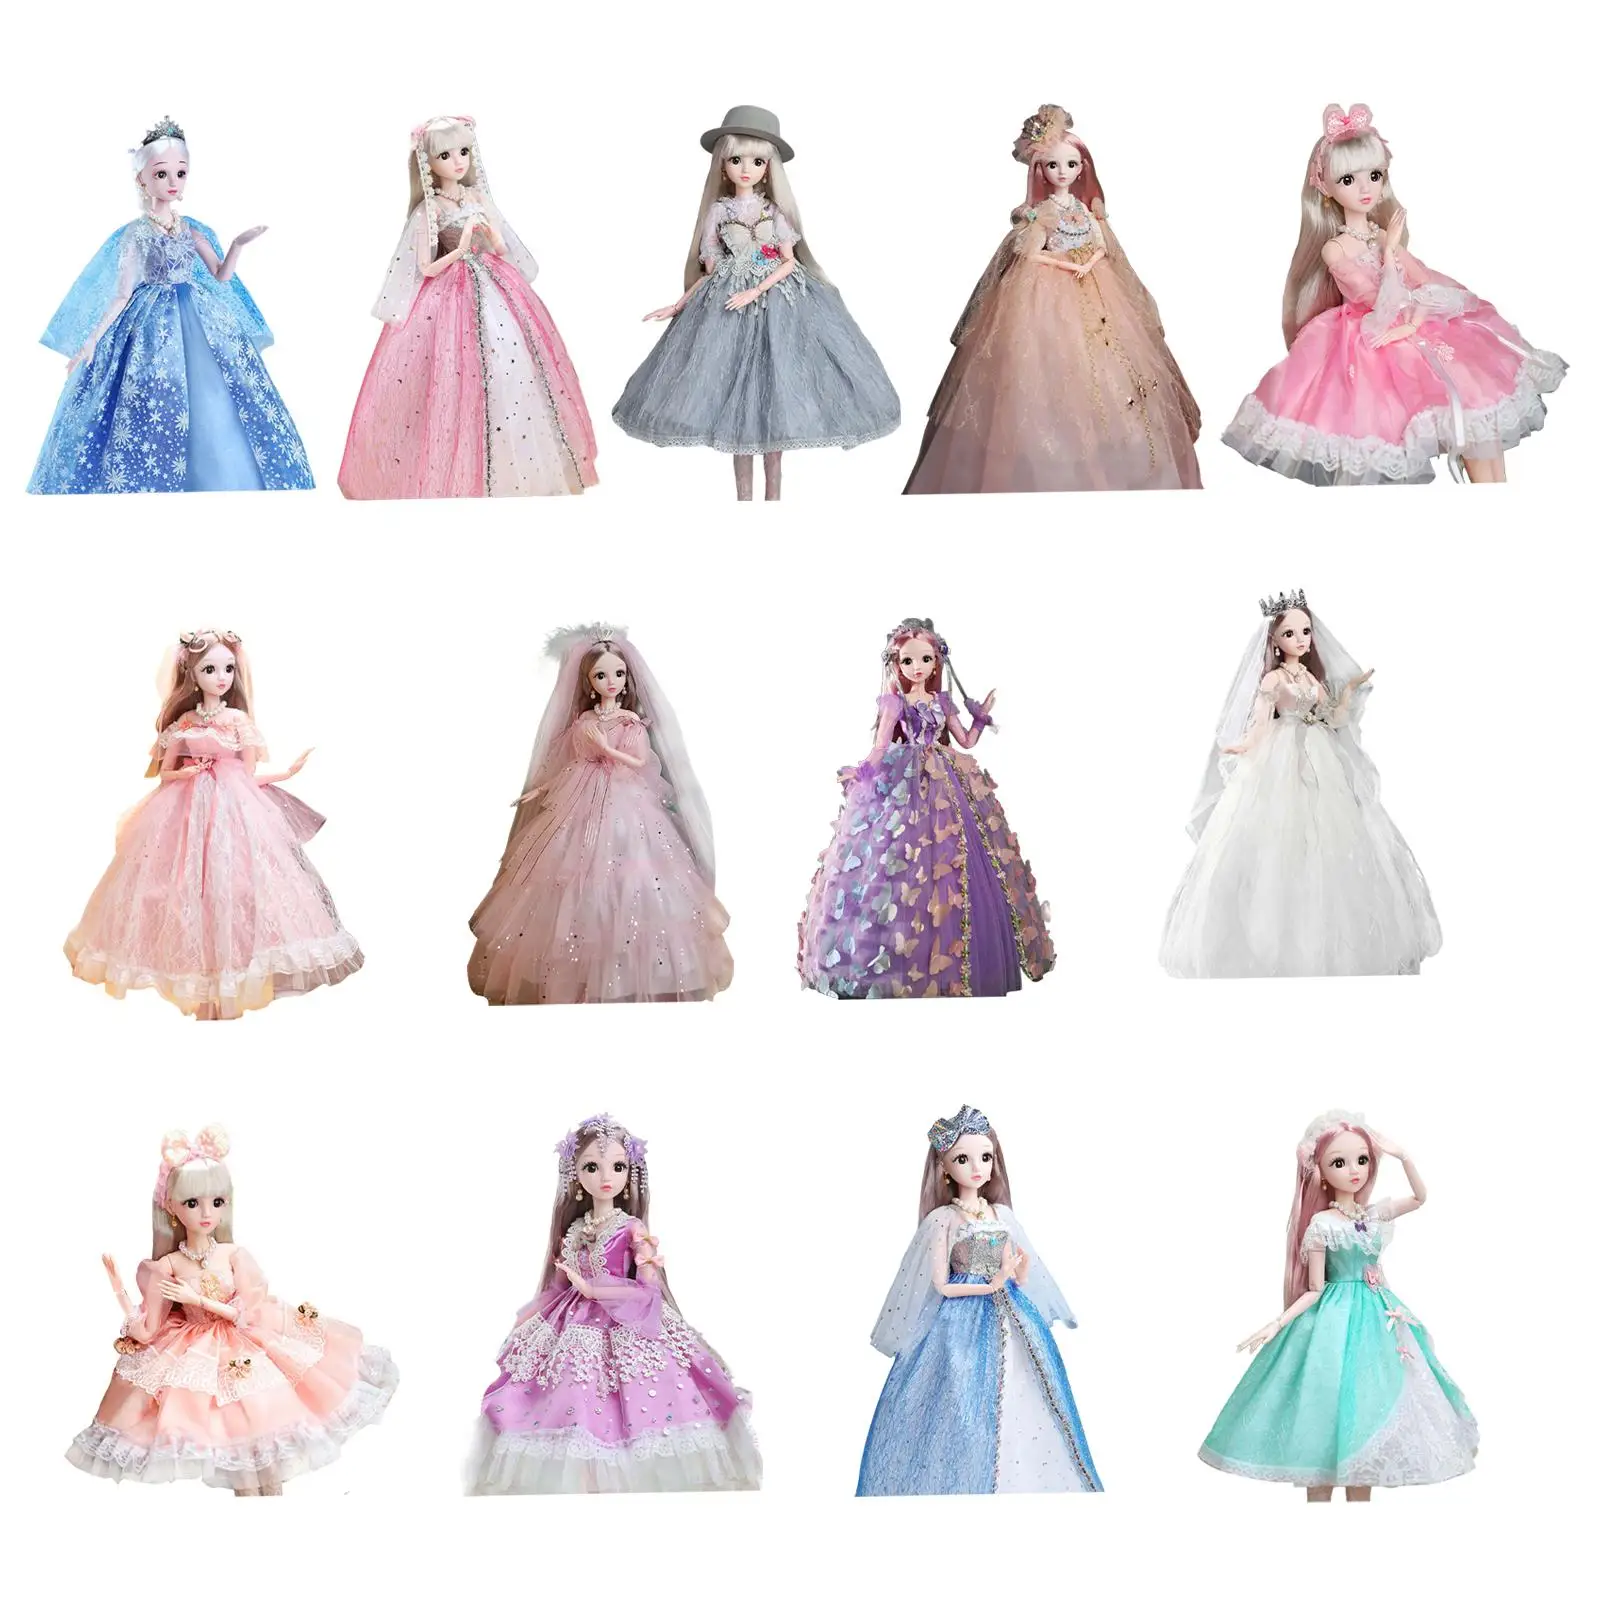 Girls Doll BJD Dolls 24 inch Ball Jointed Doll Princess Doll for Best Gift Doll Playset Tea Party Girl Kids Toys